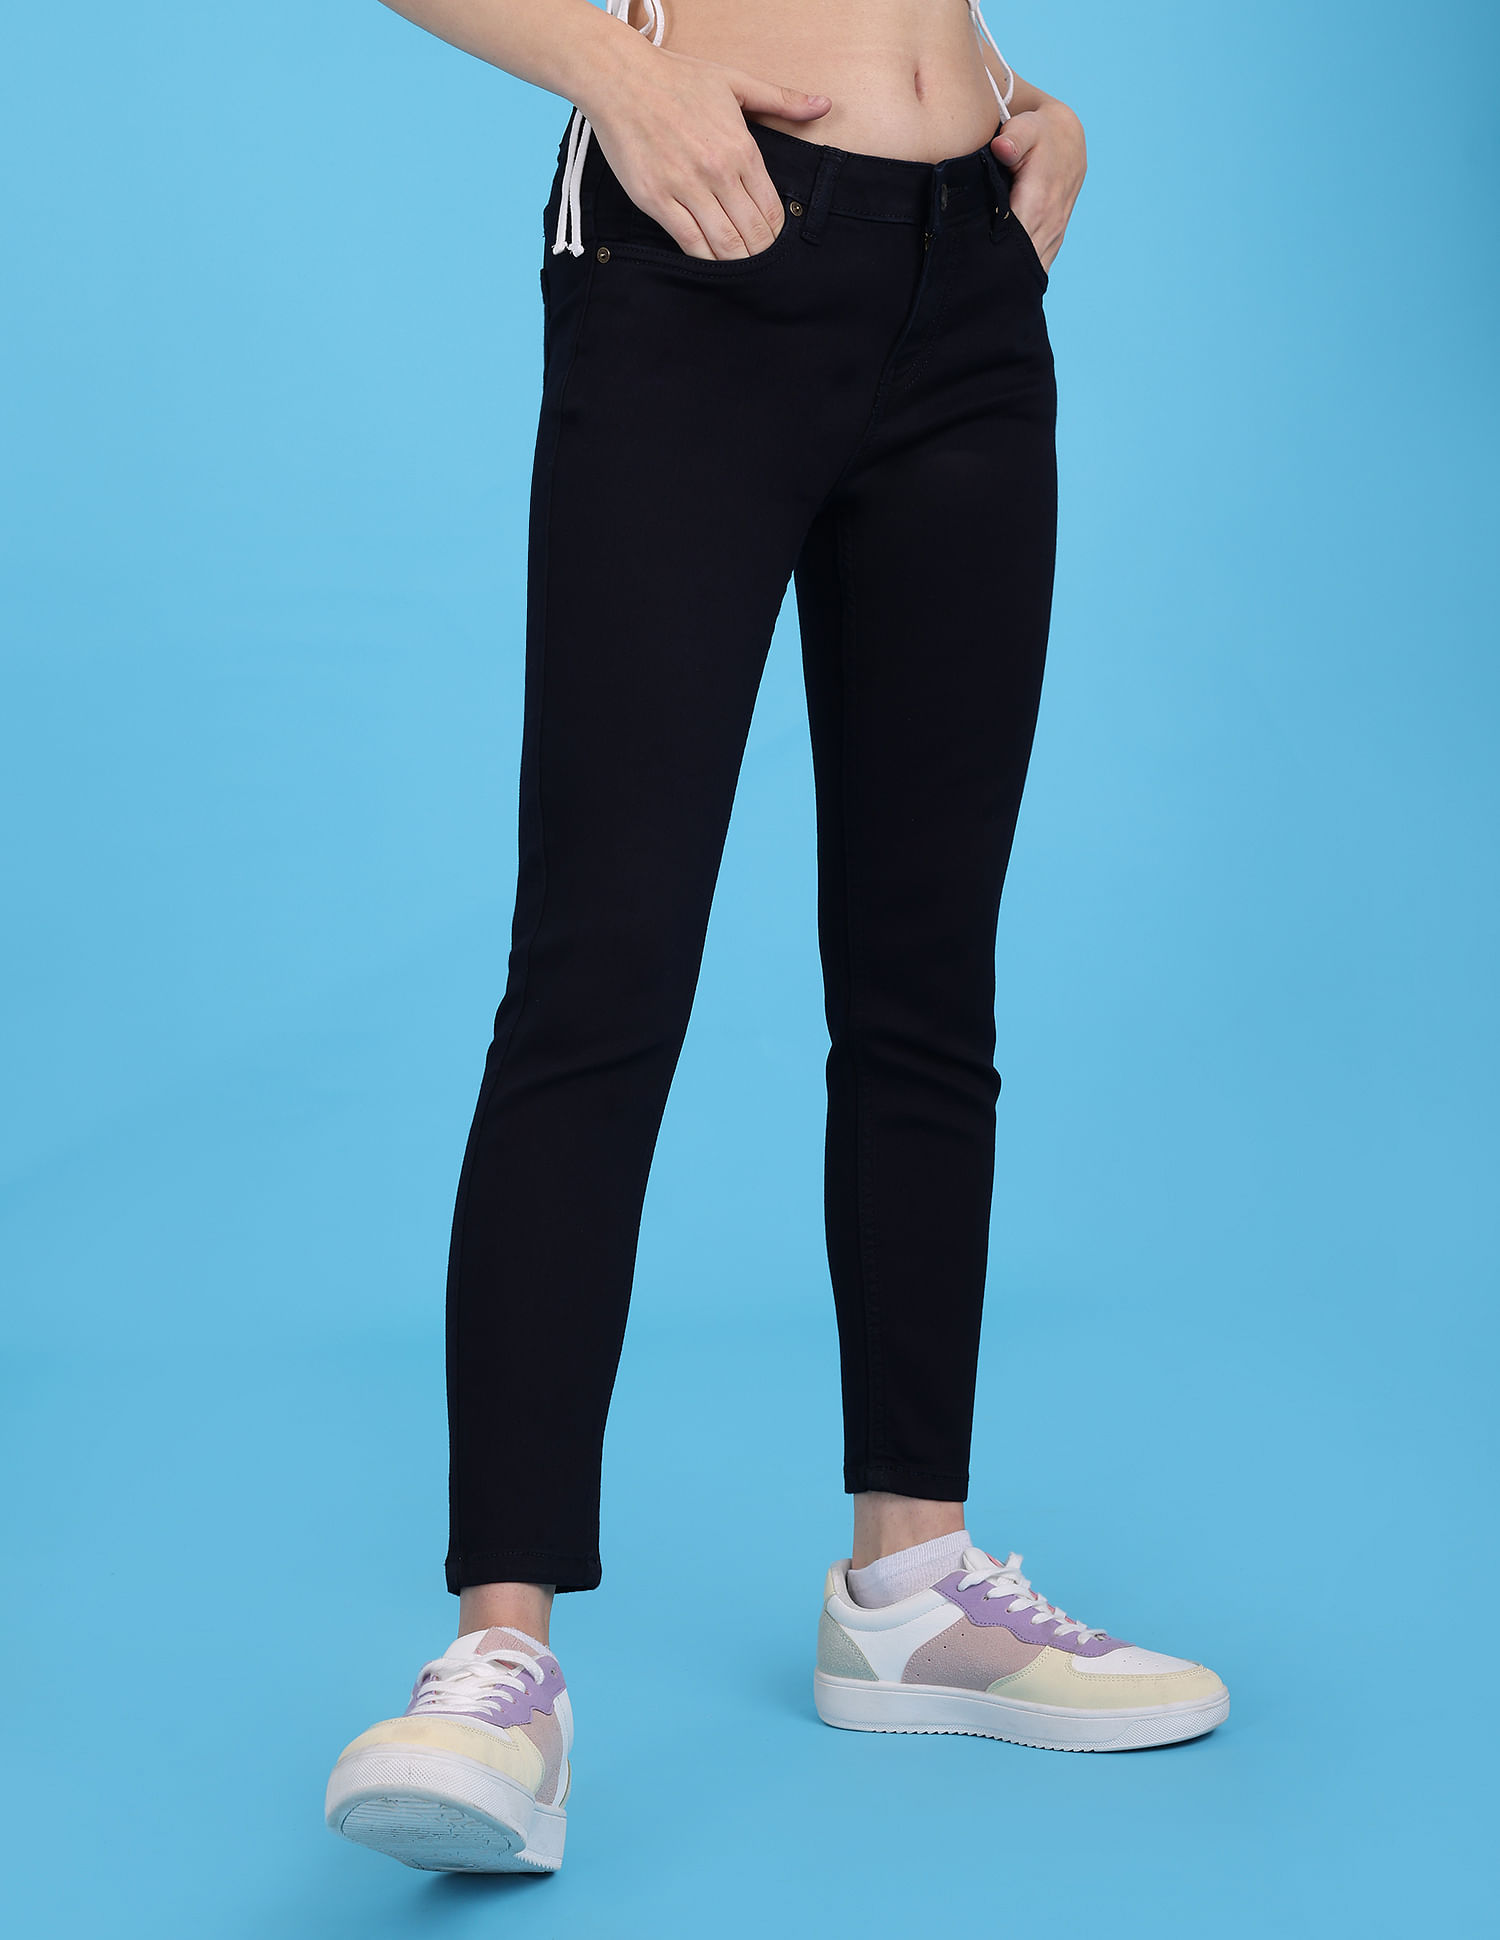 FLYING MACHINE Skinny Women Blue Jeans - Buy FLYING MACHINE Skinny Women  Blue Jeans Online at Best Prices in India